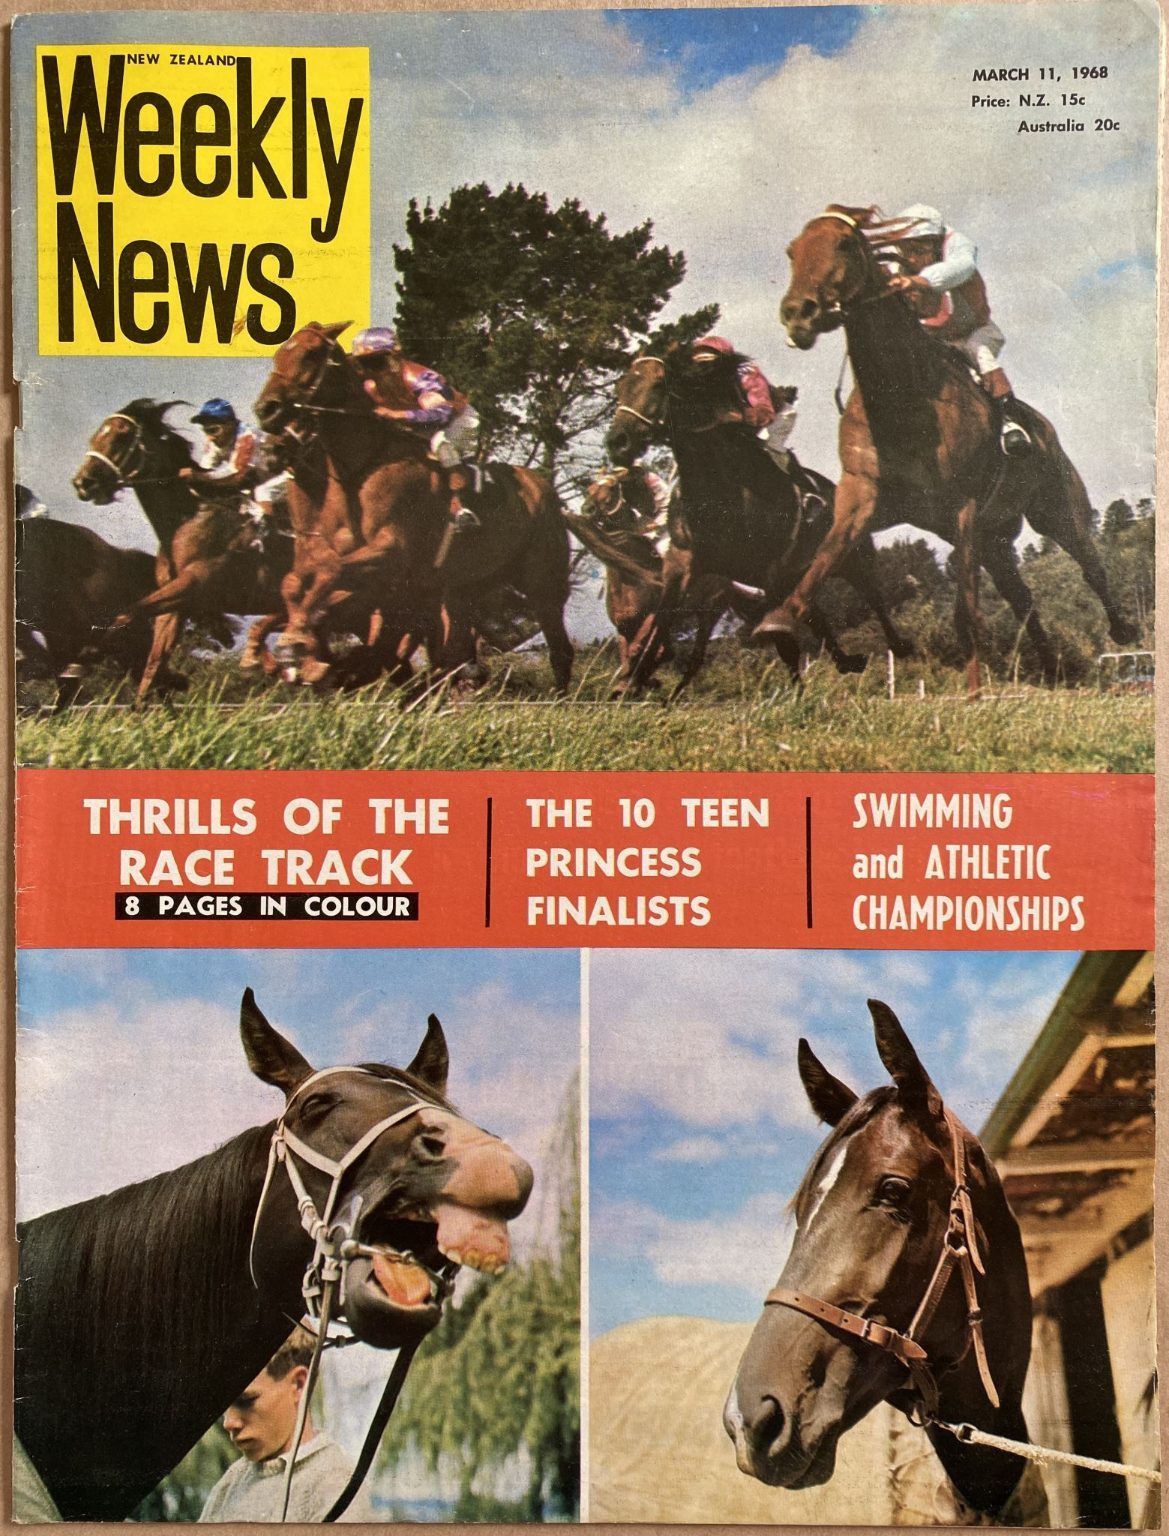 OLD NEWSPAPER: New Zealand Weekly News, No. 5441, 11 March 1968